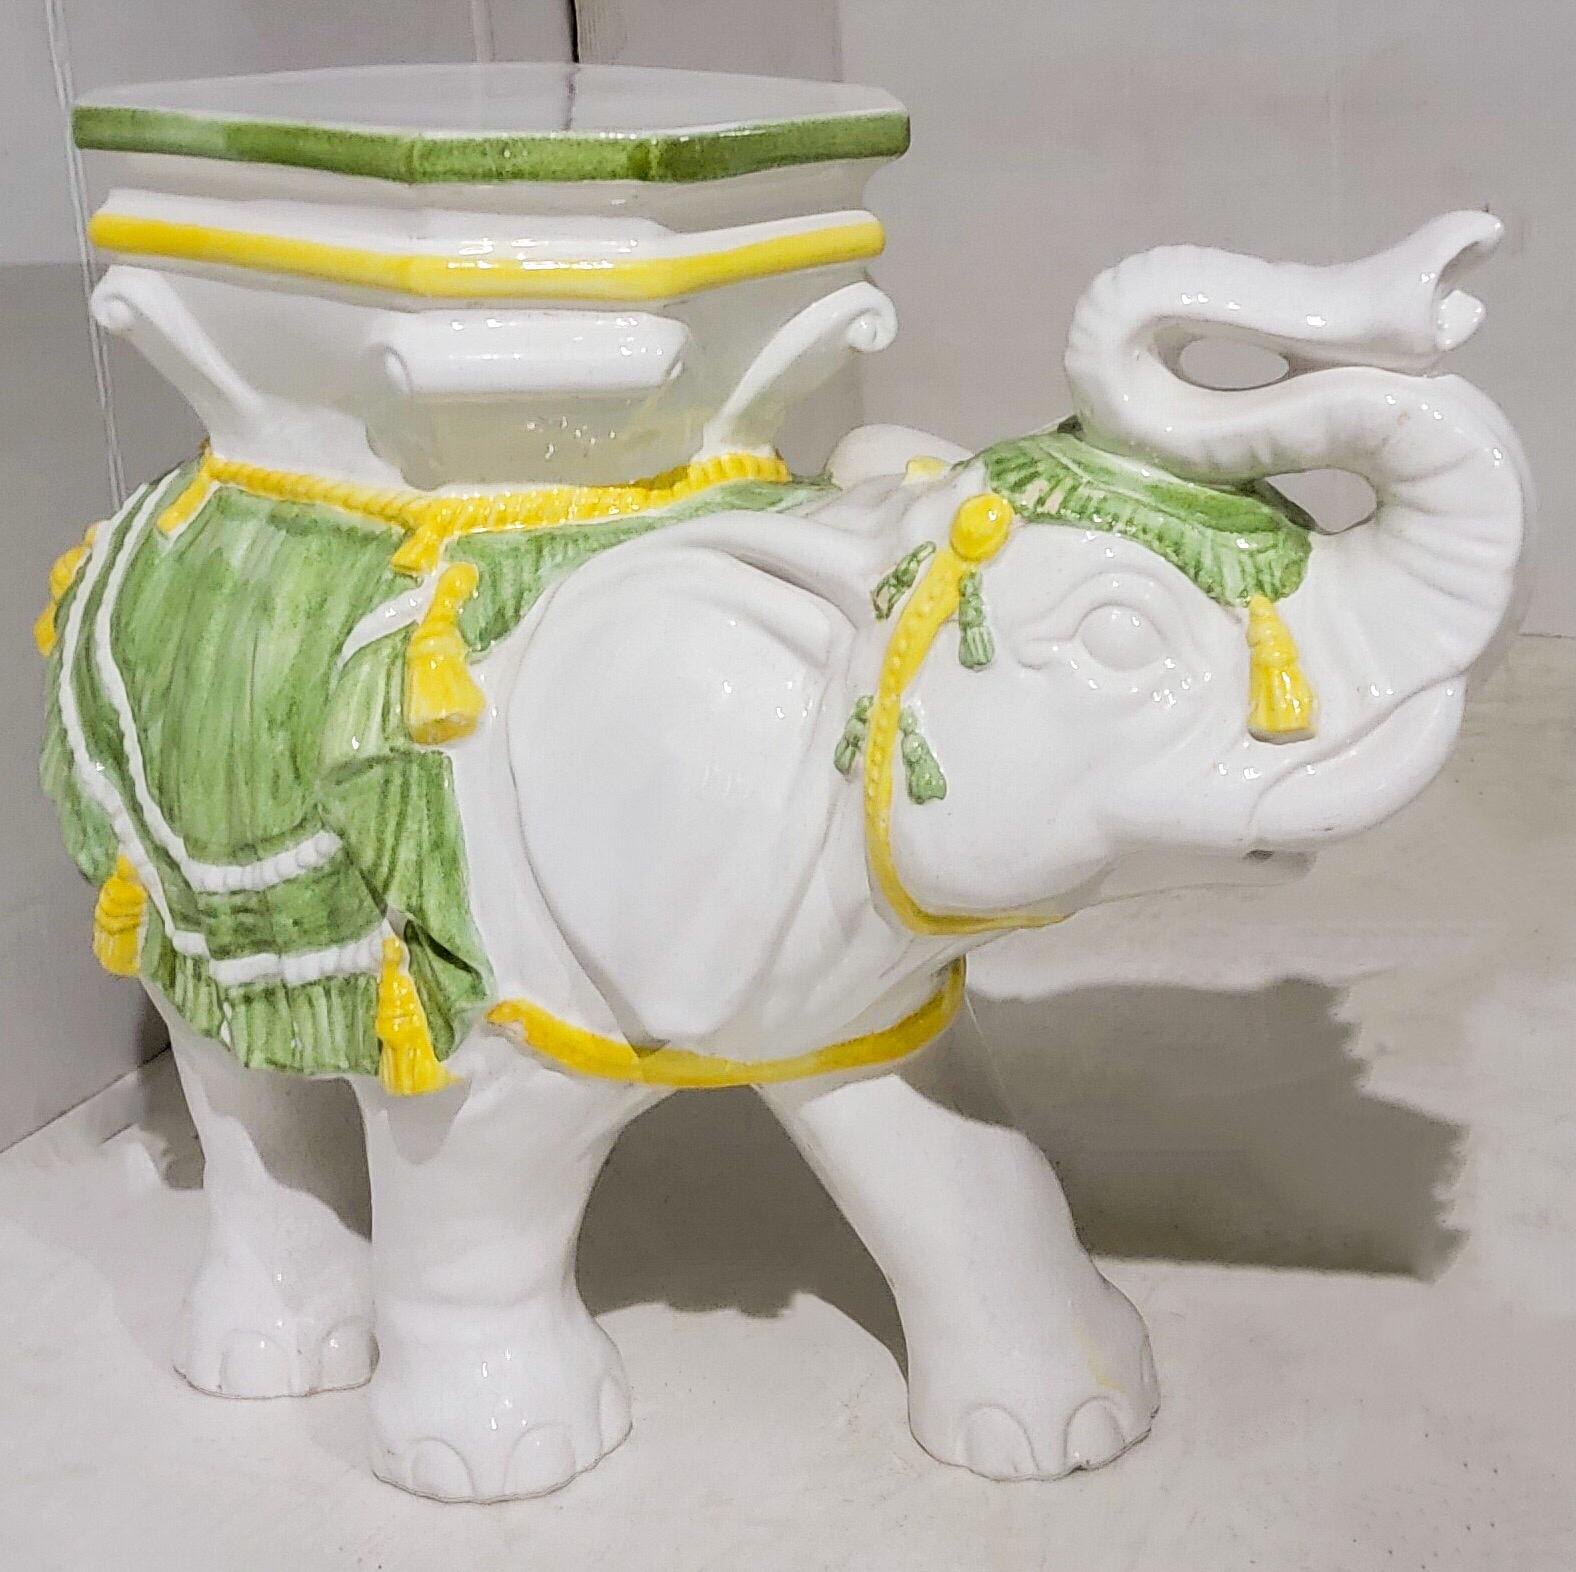 This s is a Hollywood Regency Era elephant garden seat in a vivd green and yellow coloration. He is in very good condition. Heavy!